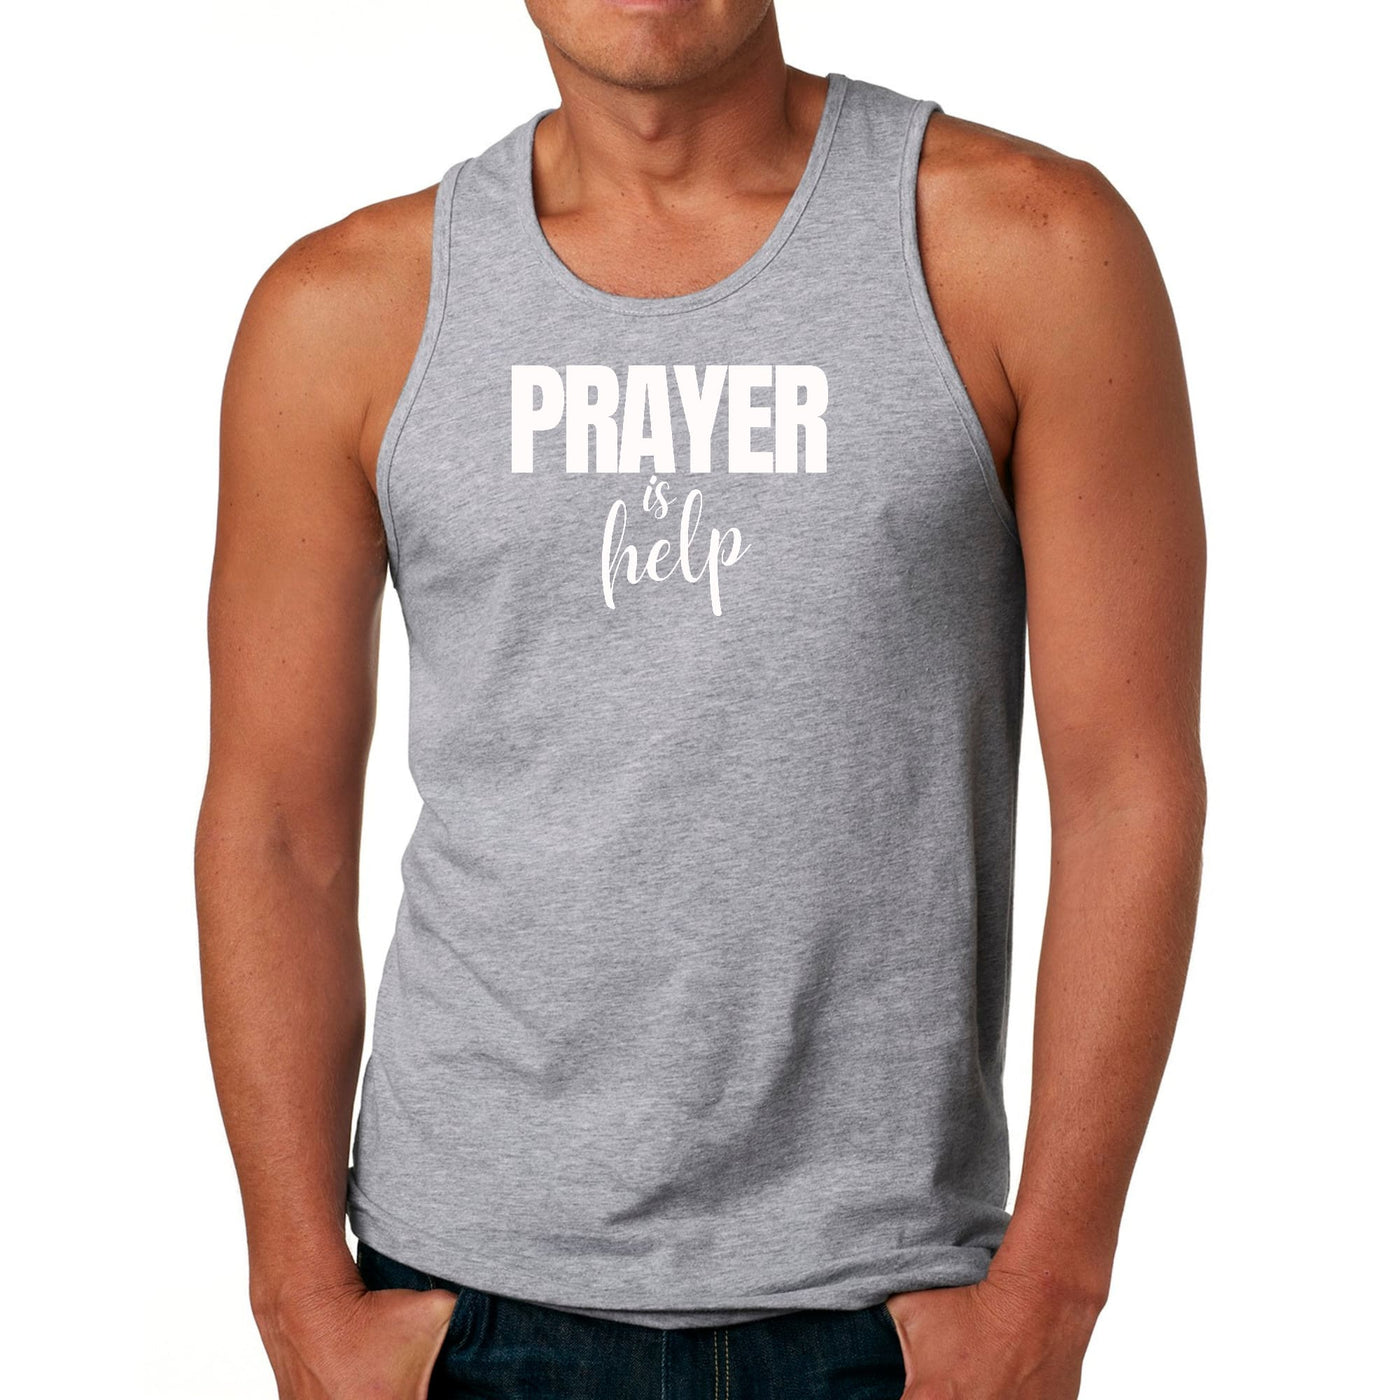 Mens Fitness Tank Top Graphic T-shirt Say It Soul - Prayer Is Help, - Mens